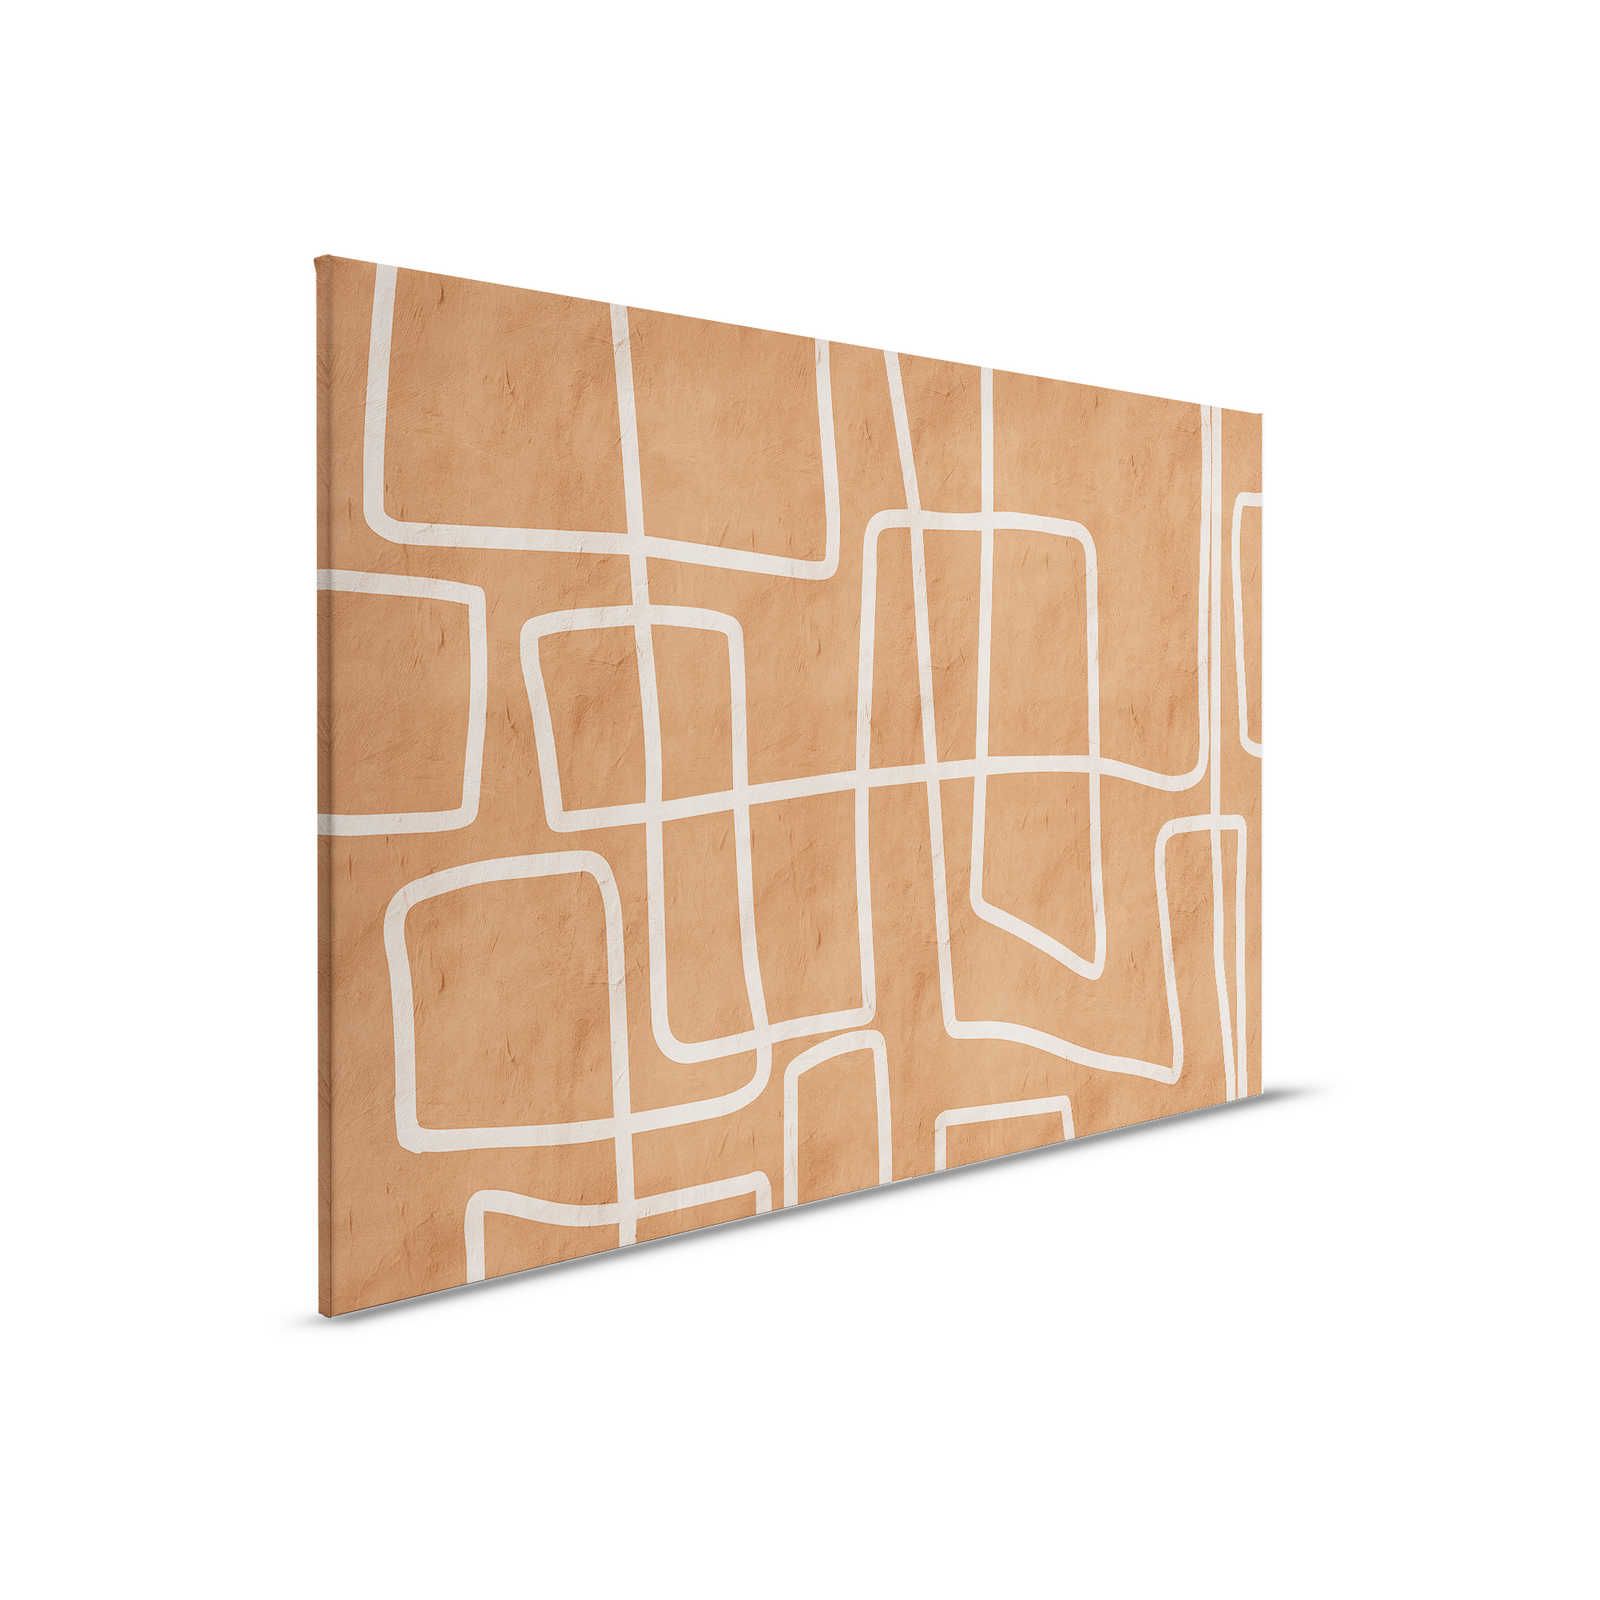         Serengeti 2 - Clay Wall Canvas Painting Terracotta with Ethno Line Pattern - 0.90 m x 0.60 m
    